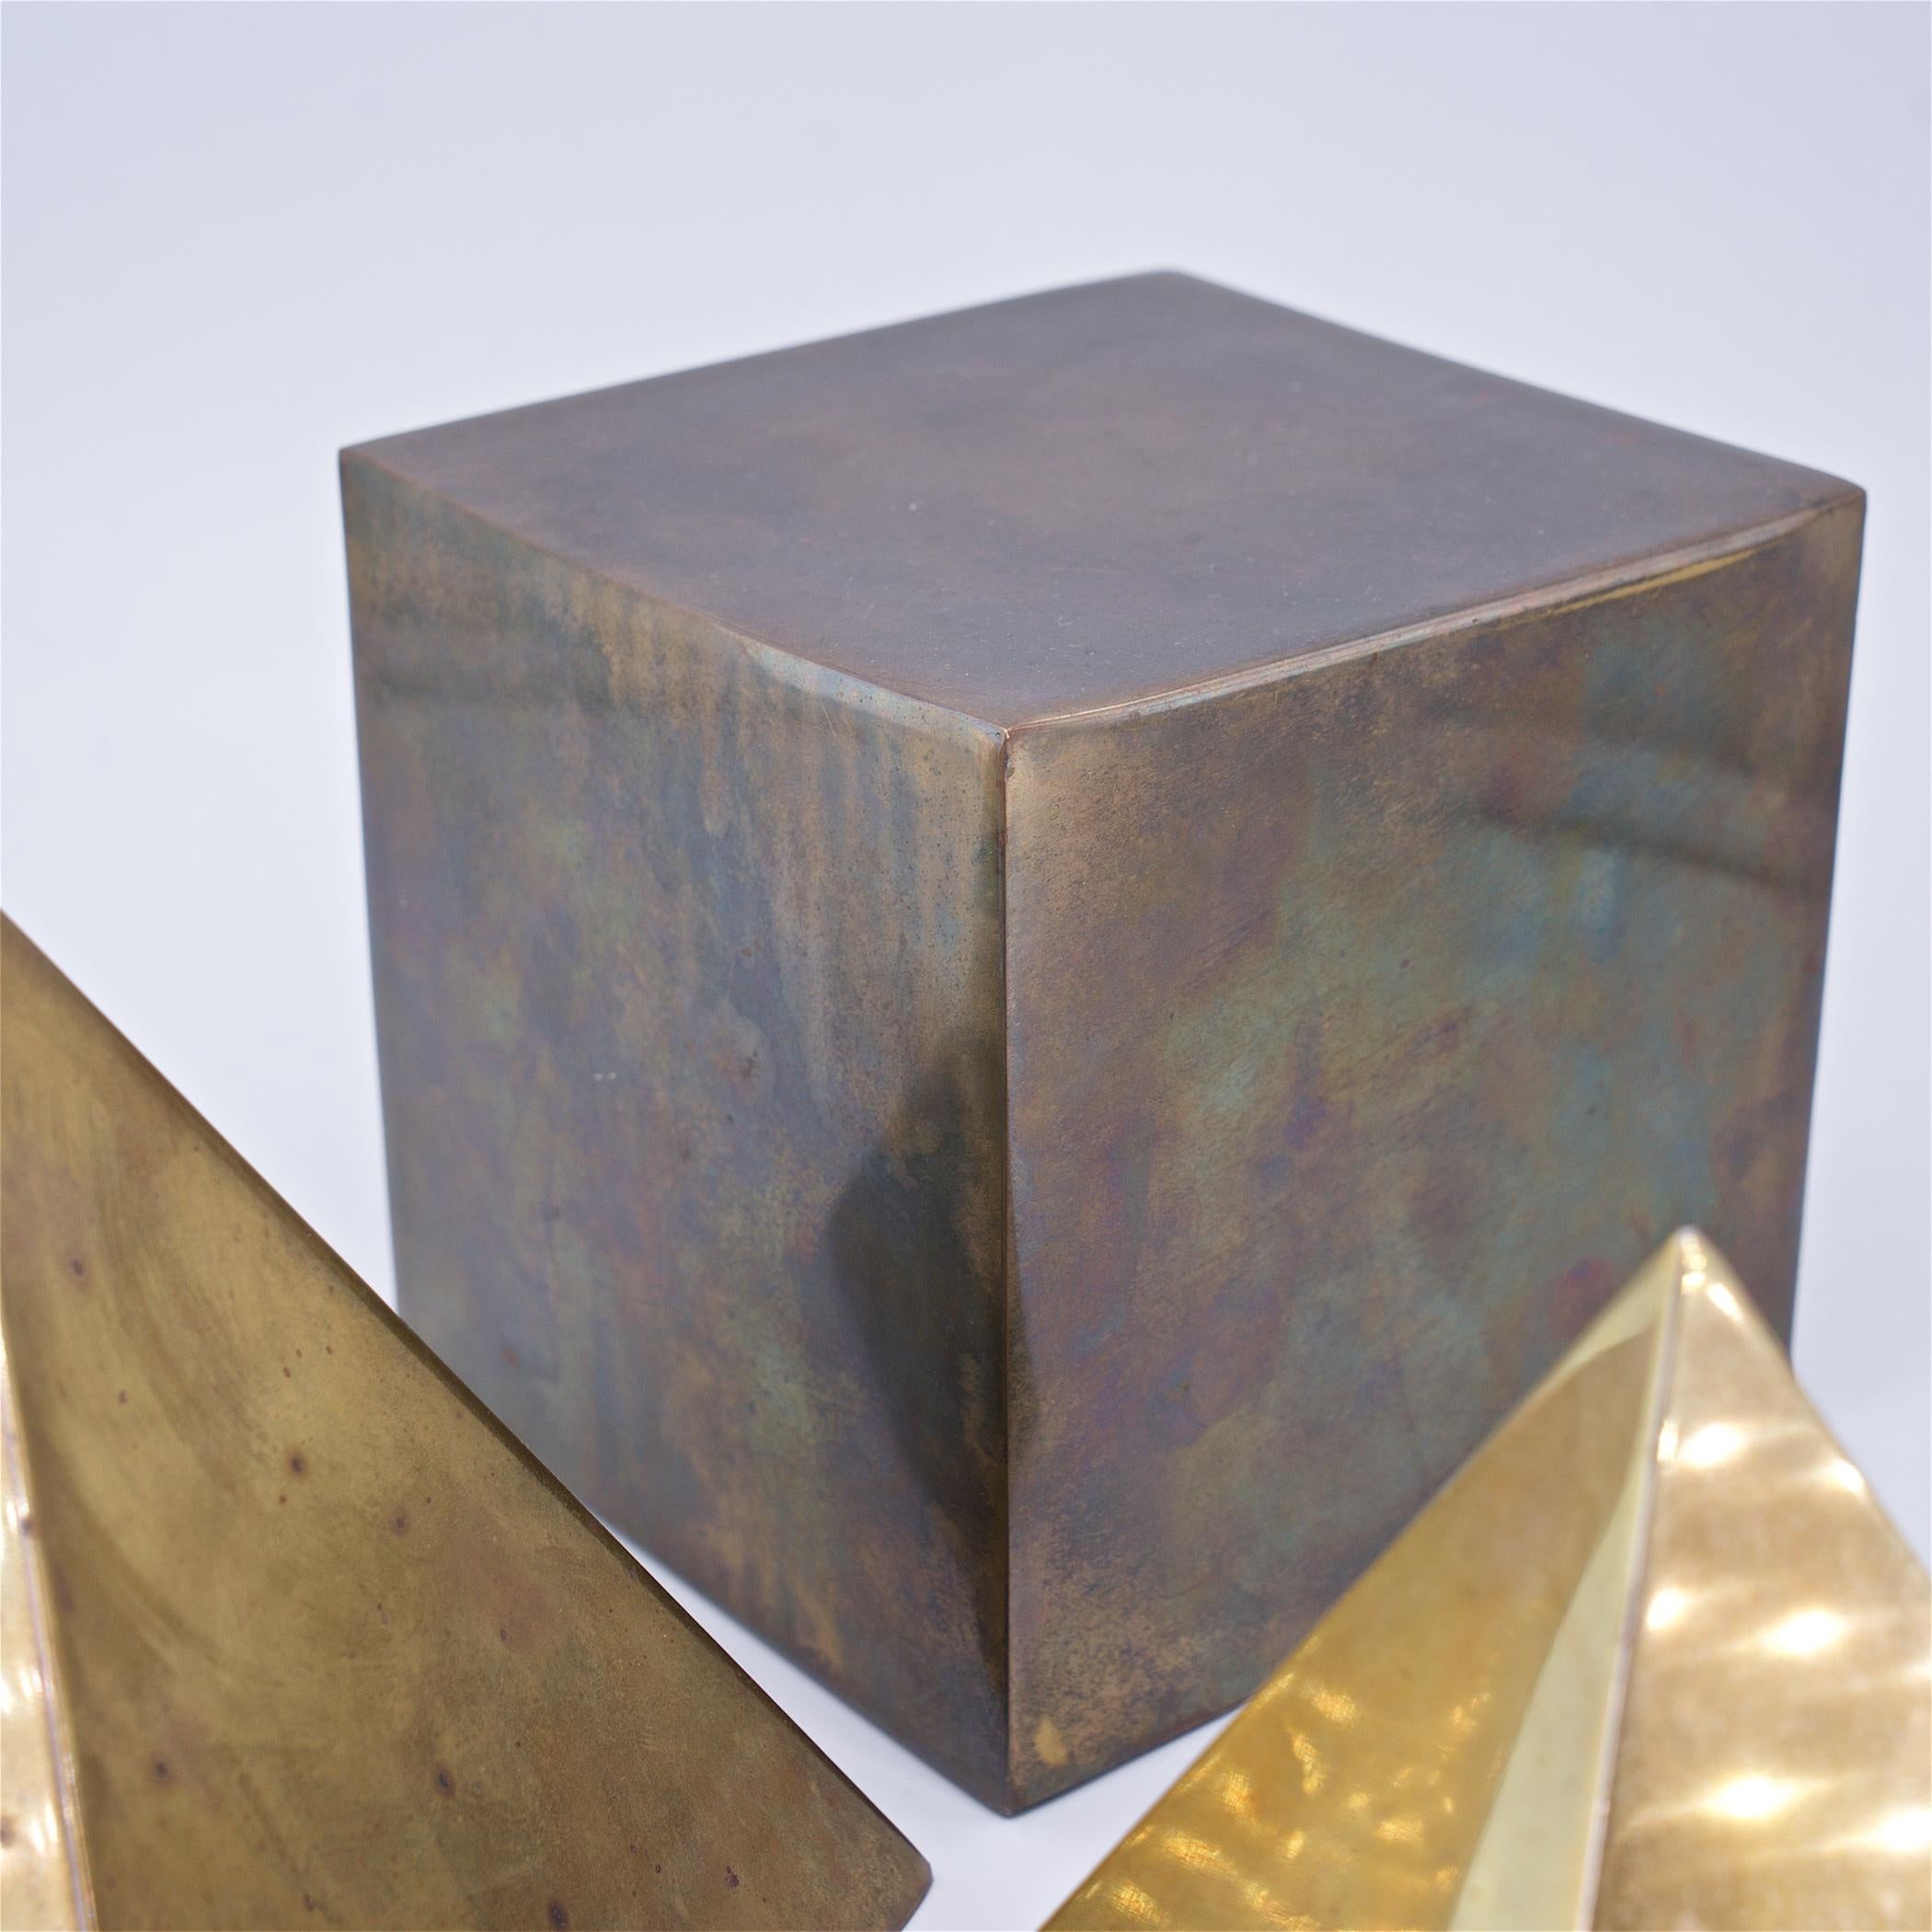 Vintage 1970s Brass Geometric Table Sculptures Pyramid Cube Mid-Century, Italy In Distressed Condition For Sale In Hyattsville, MD